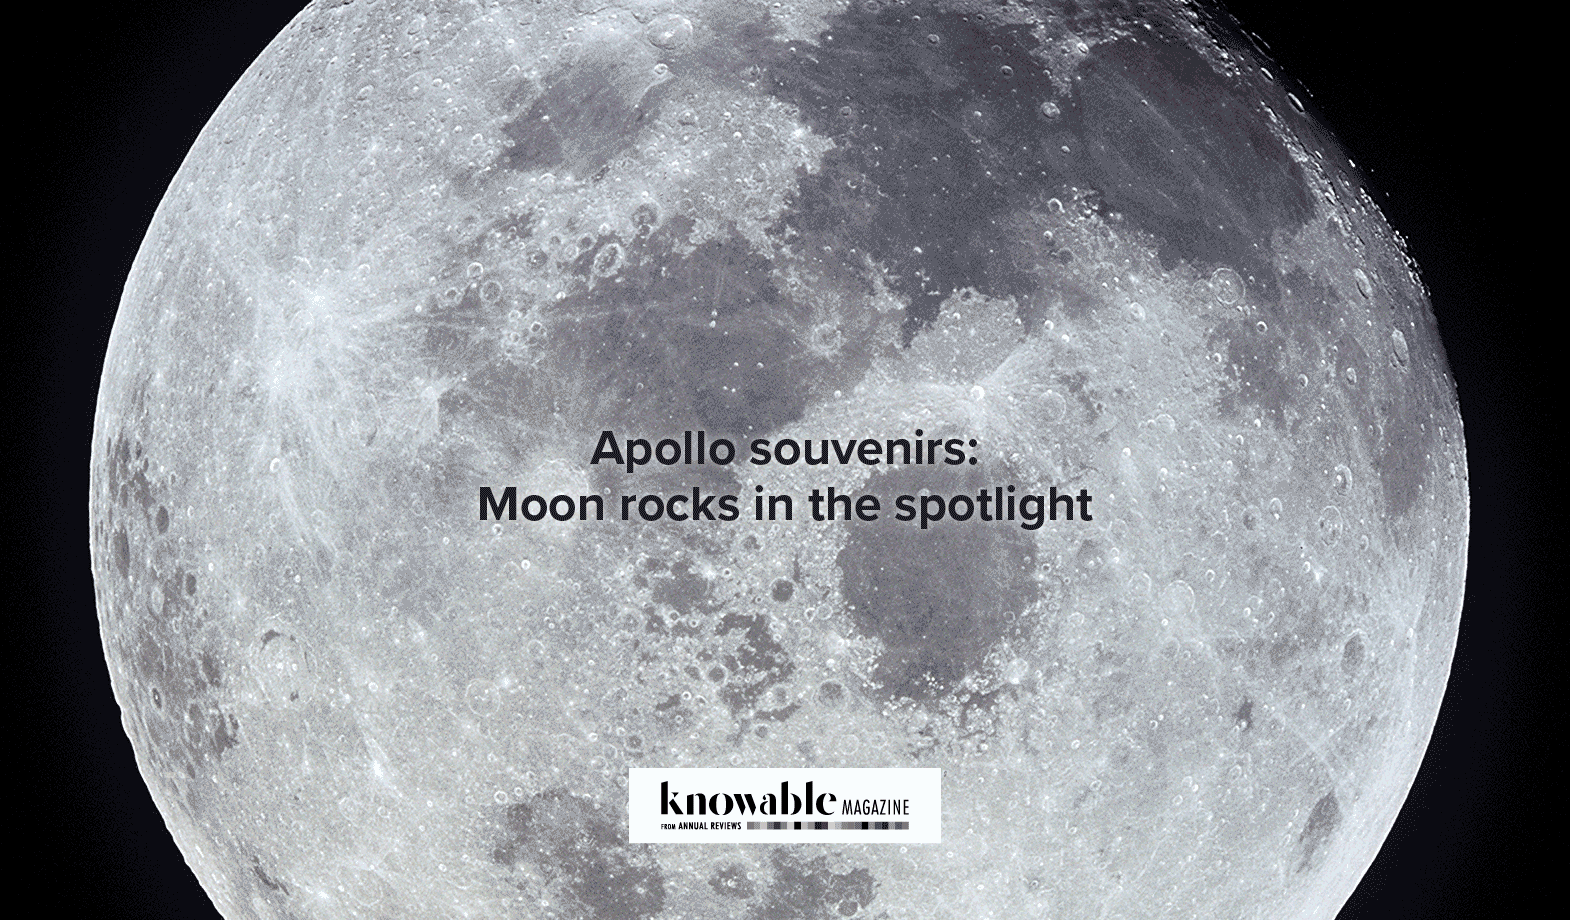 An image of the moon with the caption “Apollo souvenirs: Moon rocks in the spotlight” over it. The next few slides in this slideshow highlight Apollo landing spots and descriptions of the important rocks by name. 